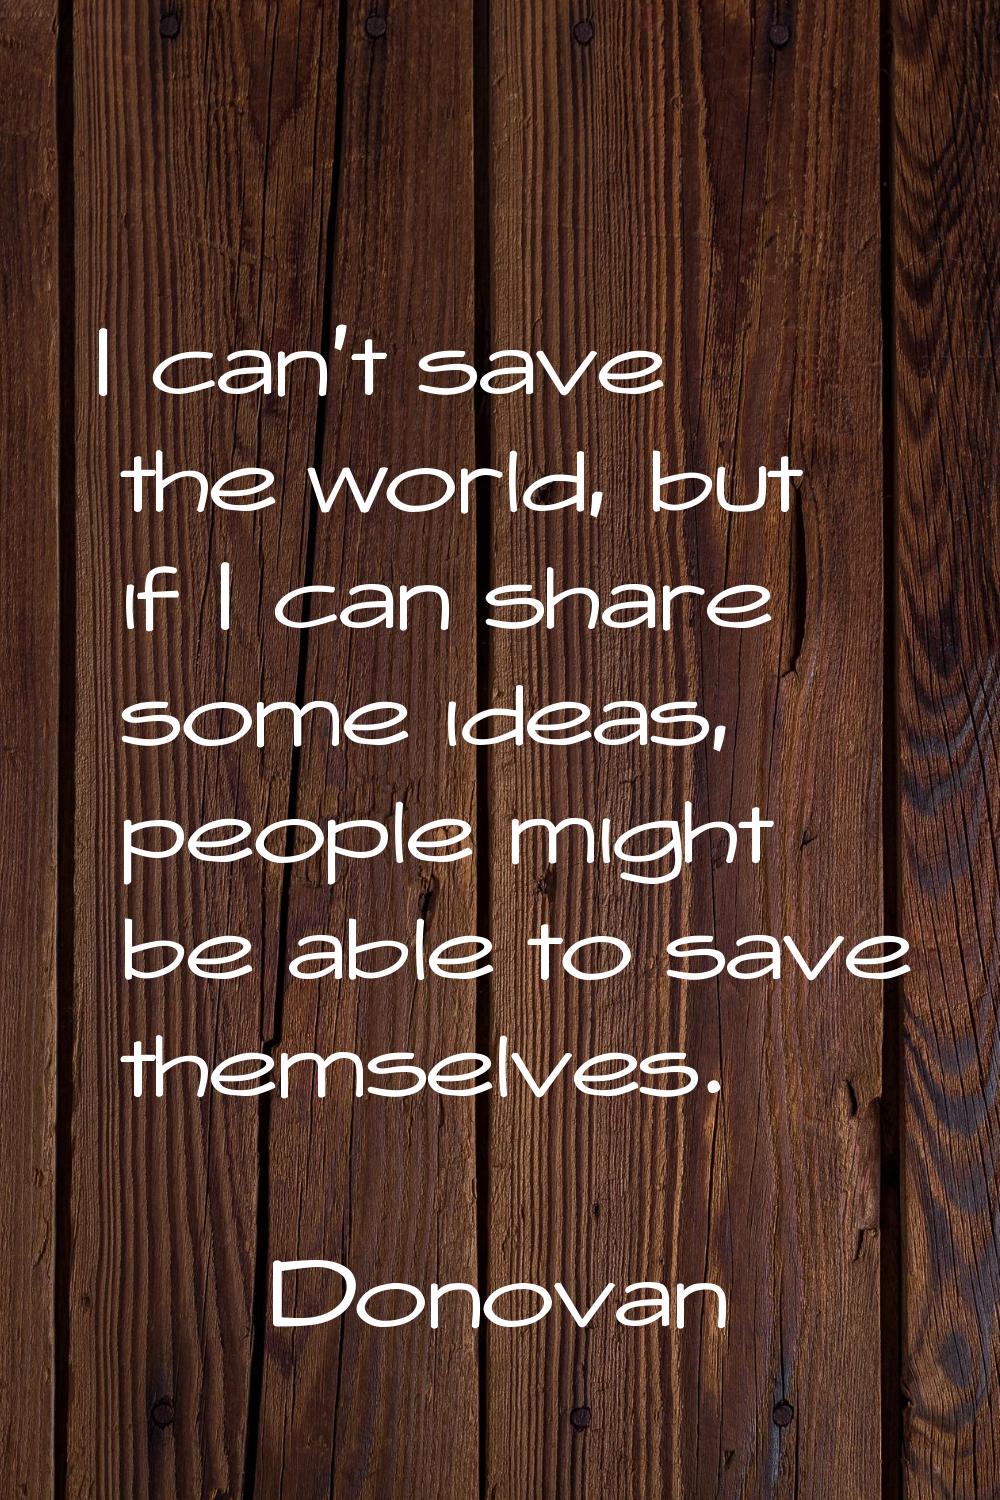 I can't save the world, but if I can share some ideas, people might be able to save themselves.